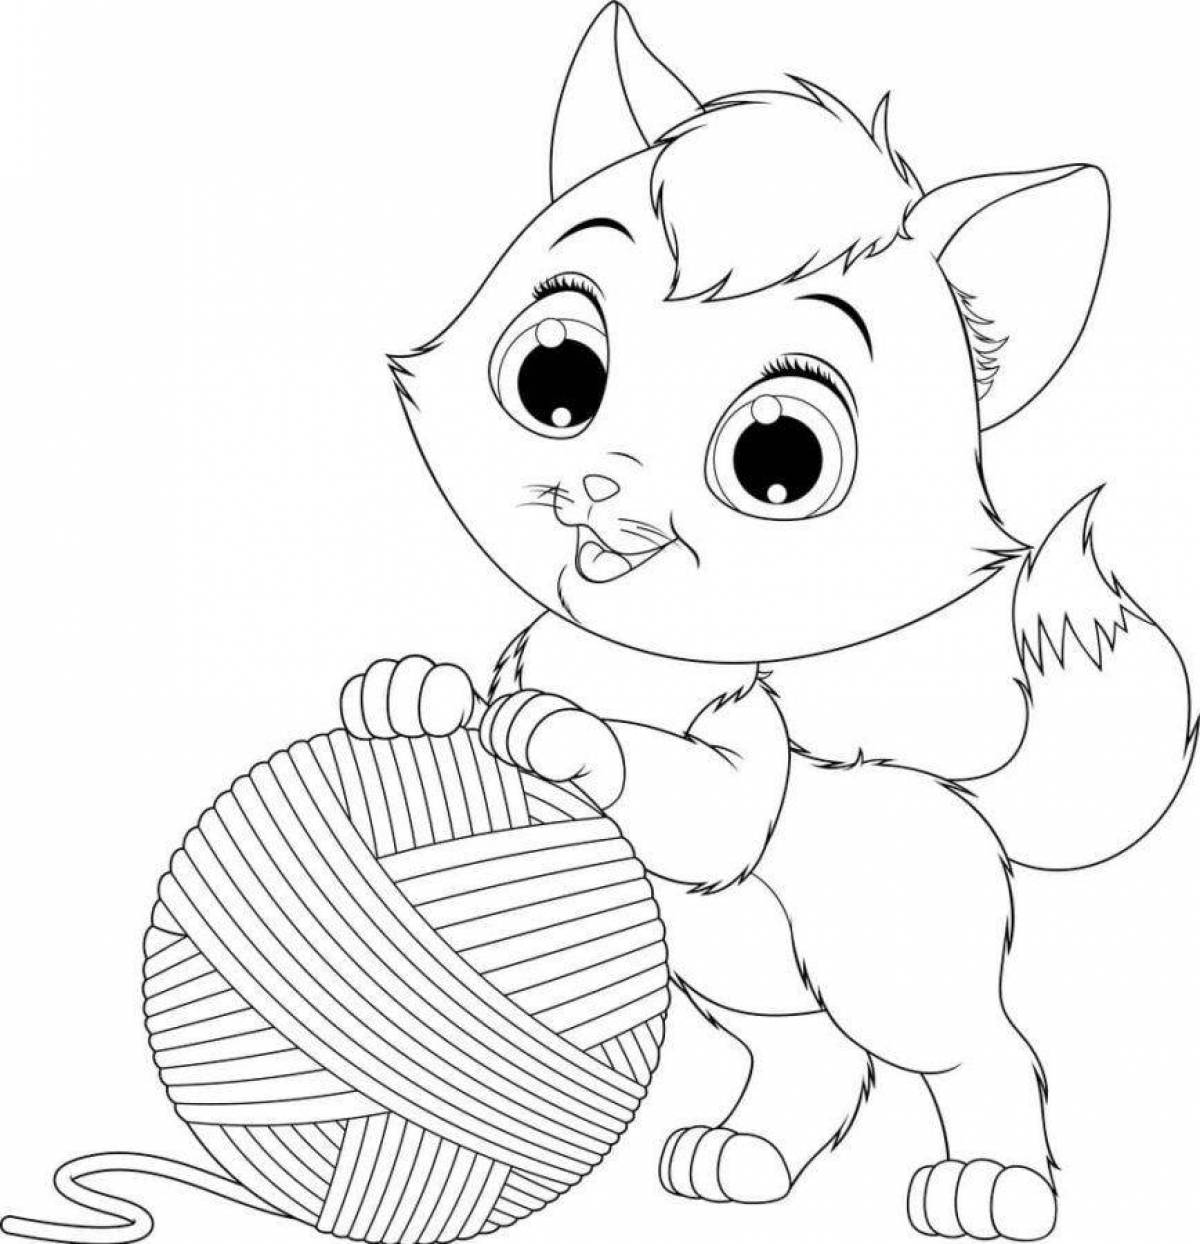 Coloring page naughty kitten with a ball